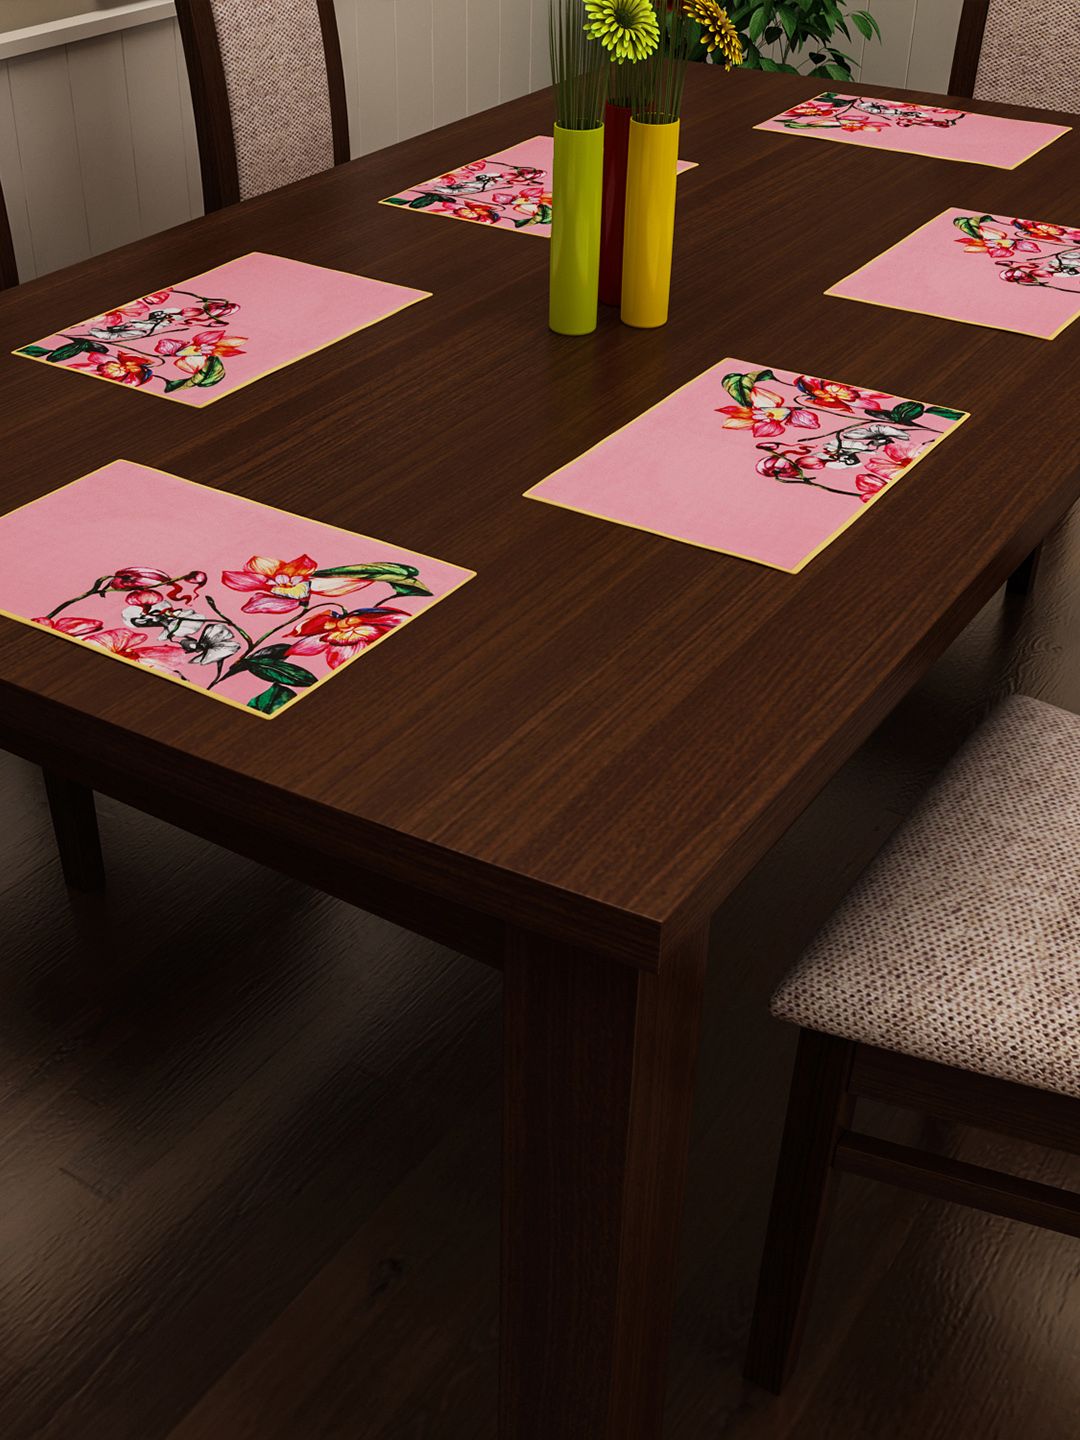 SEJ by Nisha Gupta Set of 6 Pink Printed Table Placemats Price in India